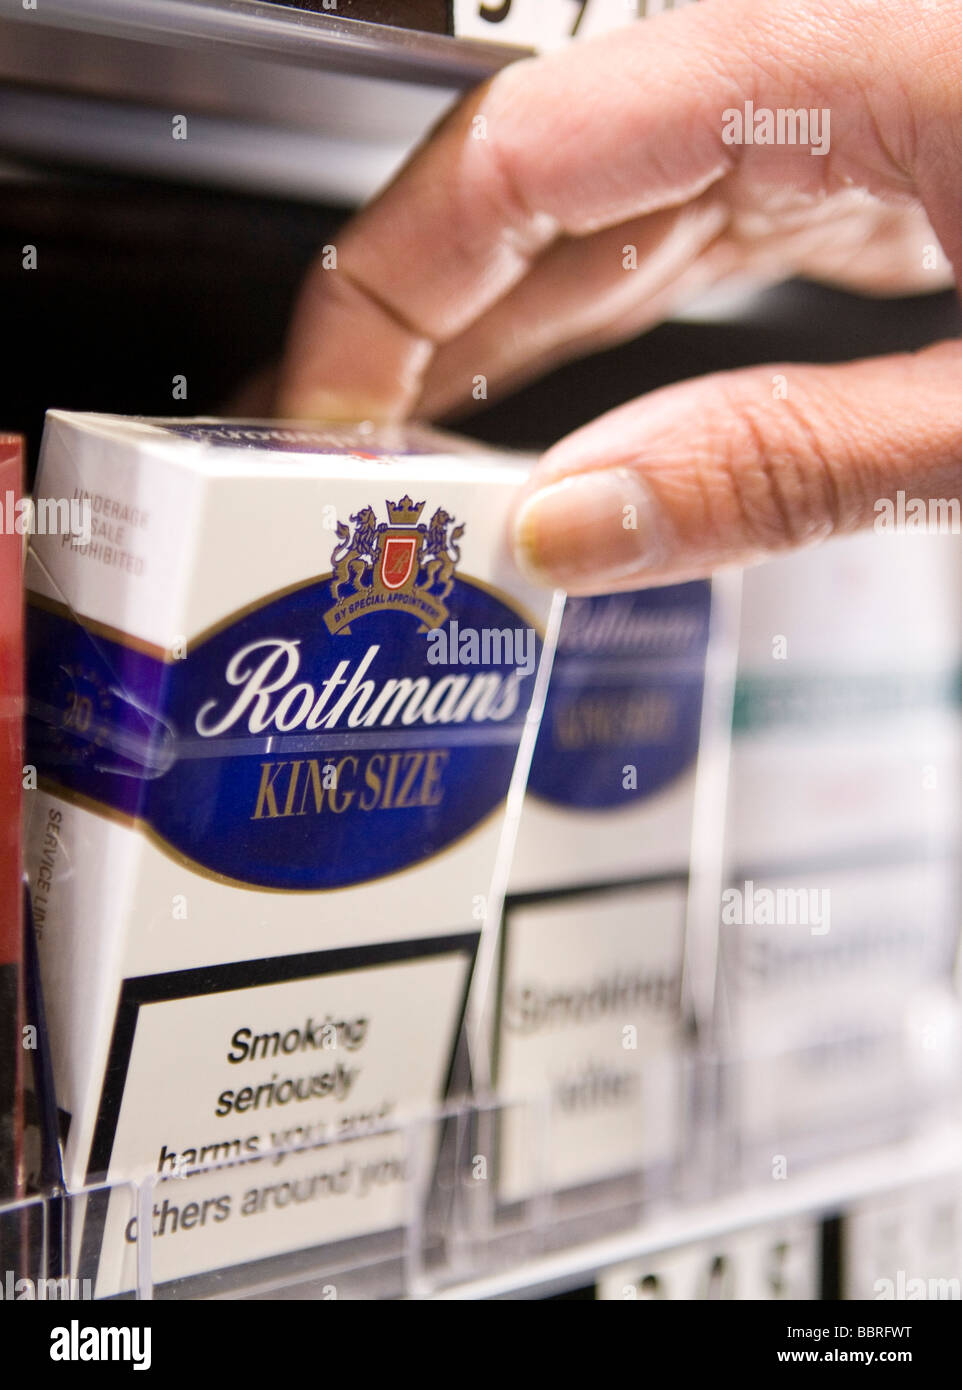 Packets of Rothmans cigarettes made by British American Tobacco sit on the shelf of a retail store Stock Photo